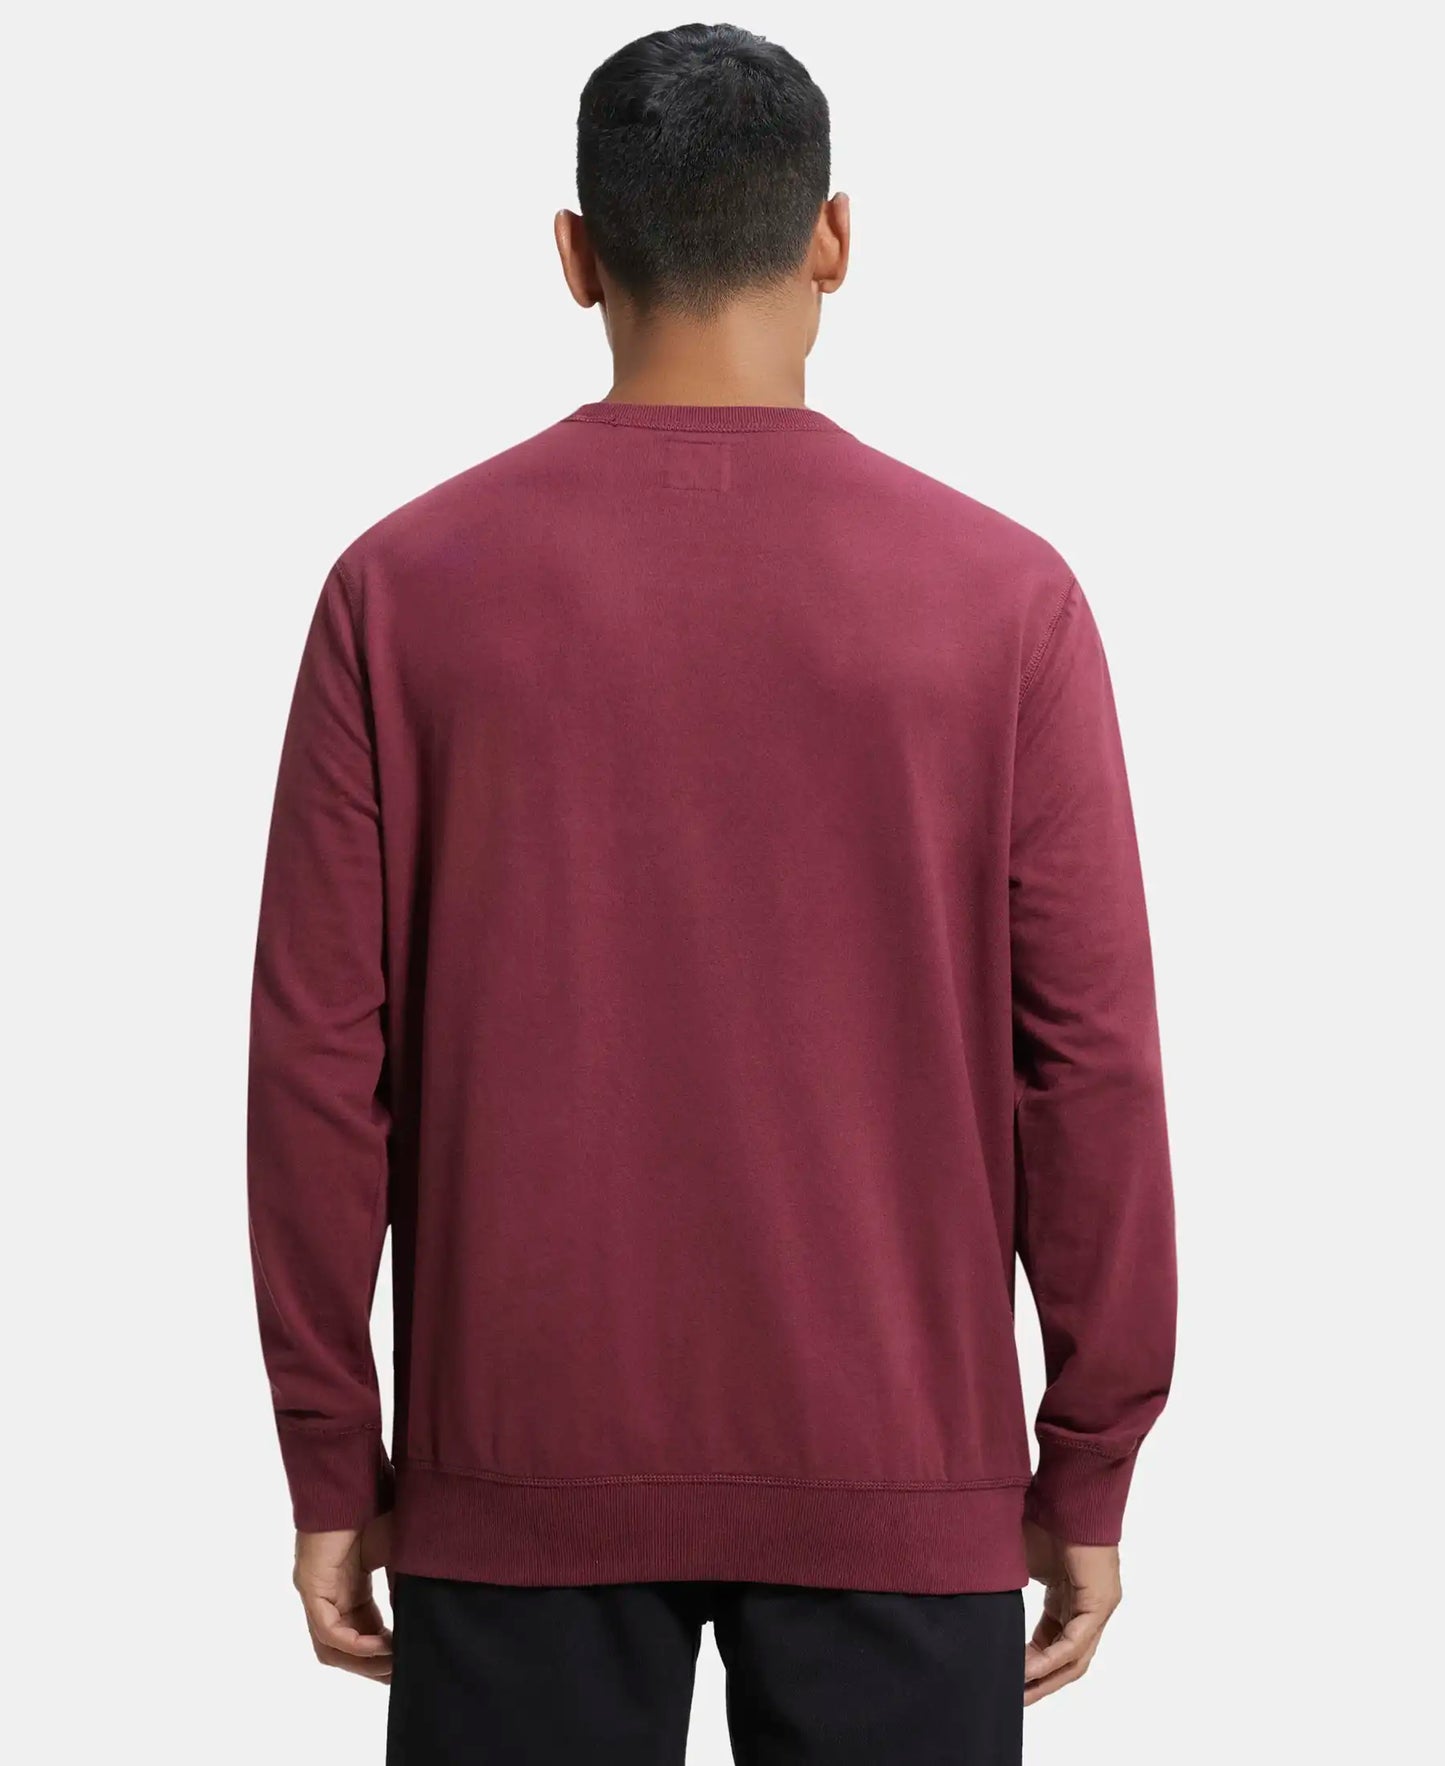 Super Combed Cotton French Terry Solid Sweatshirt with Ribbed Cuffs - Burgundy-3